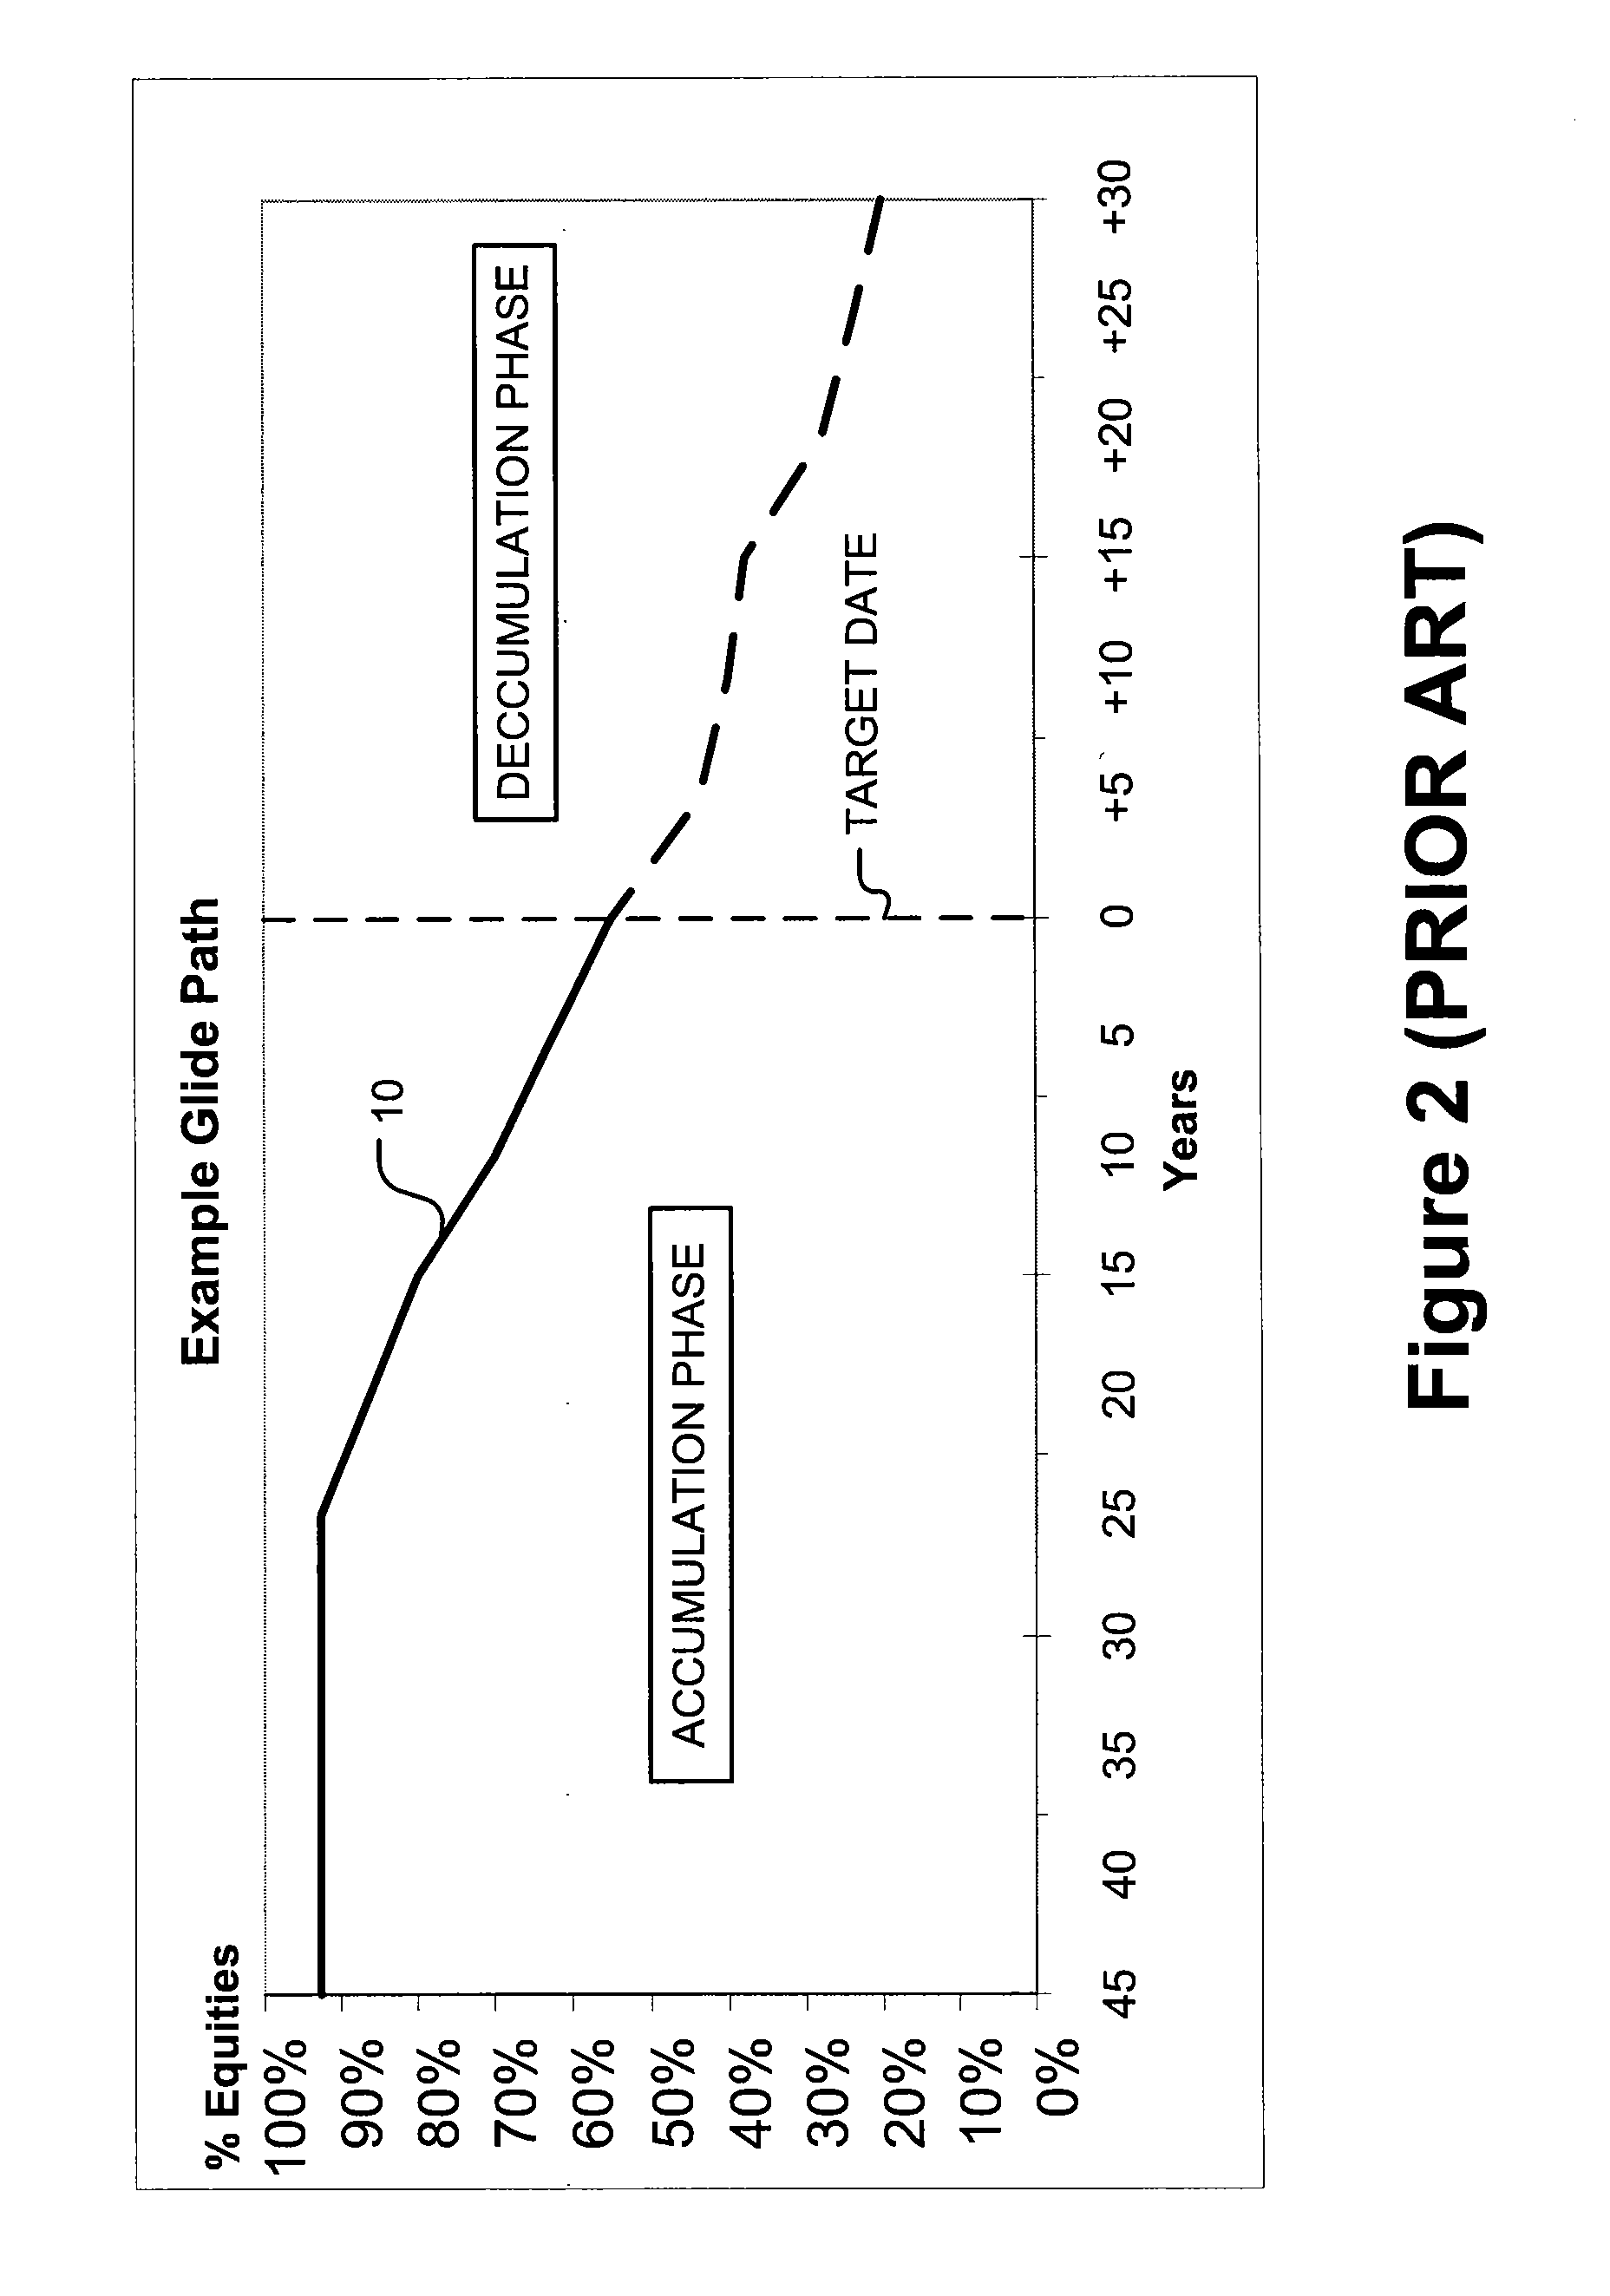 Method of evaluating the performance of a family of target date funds